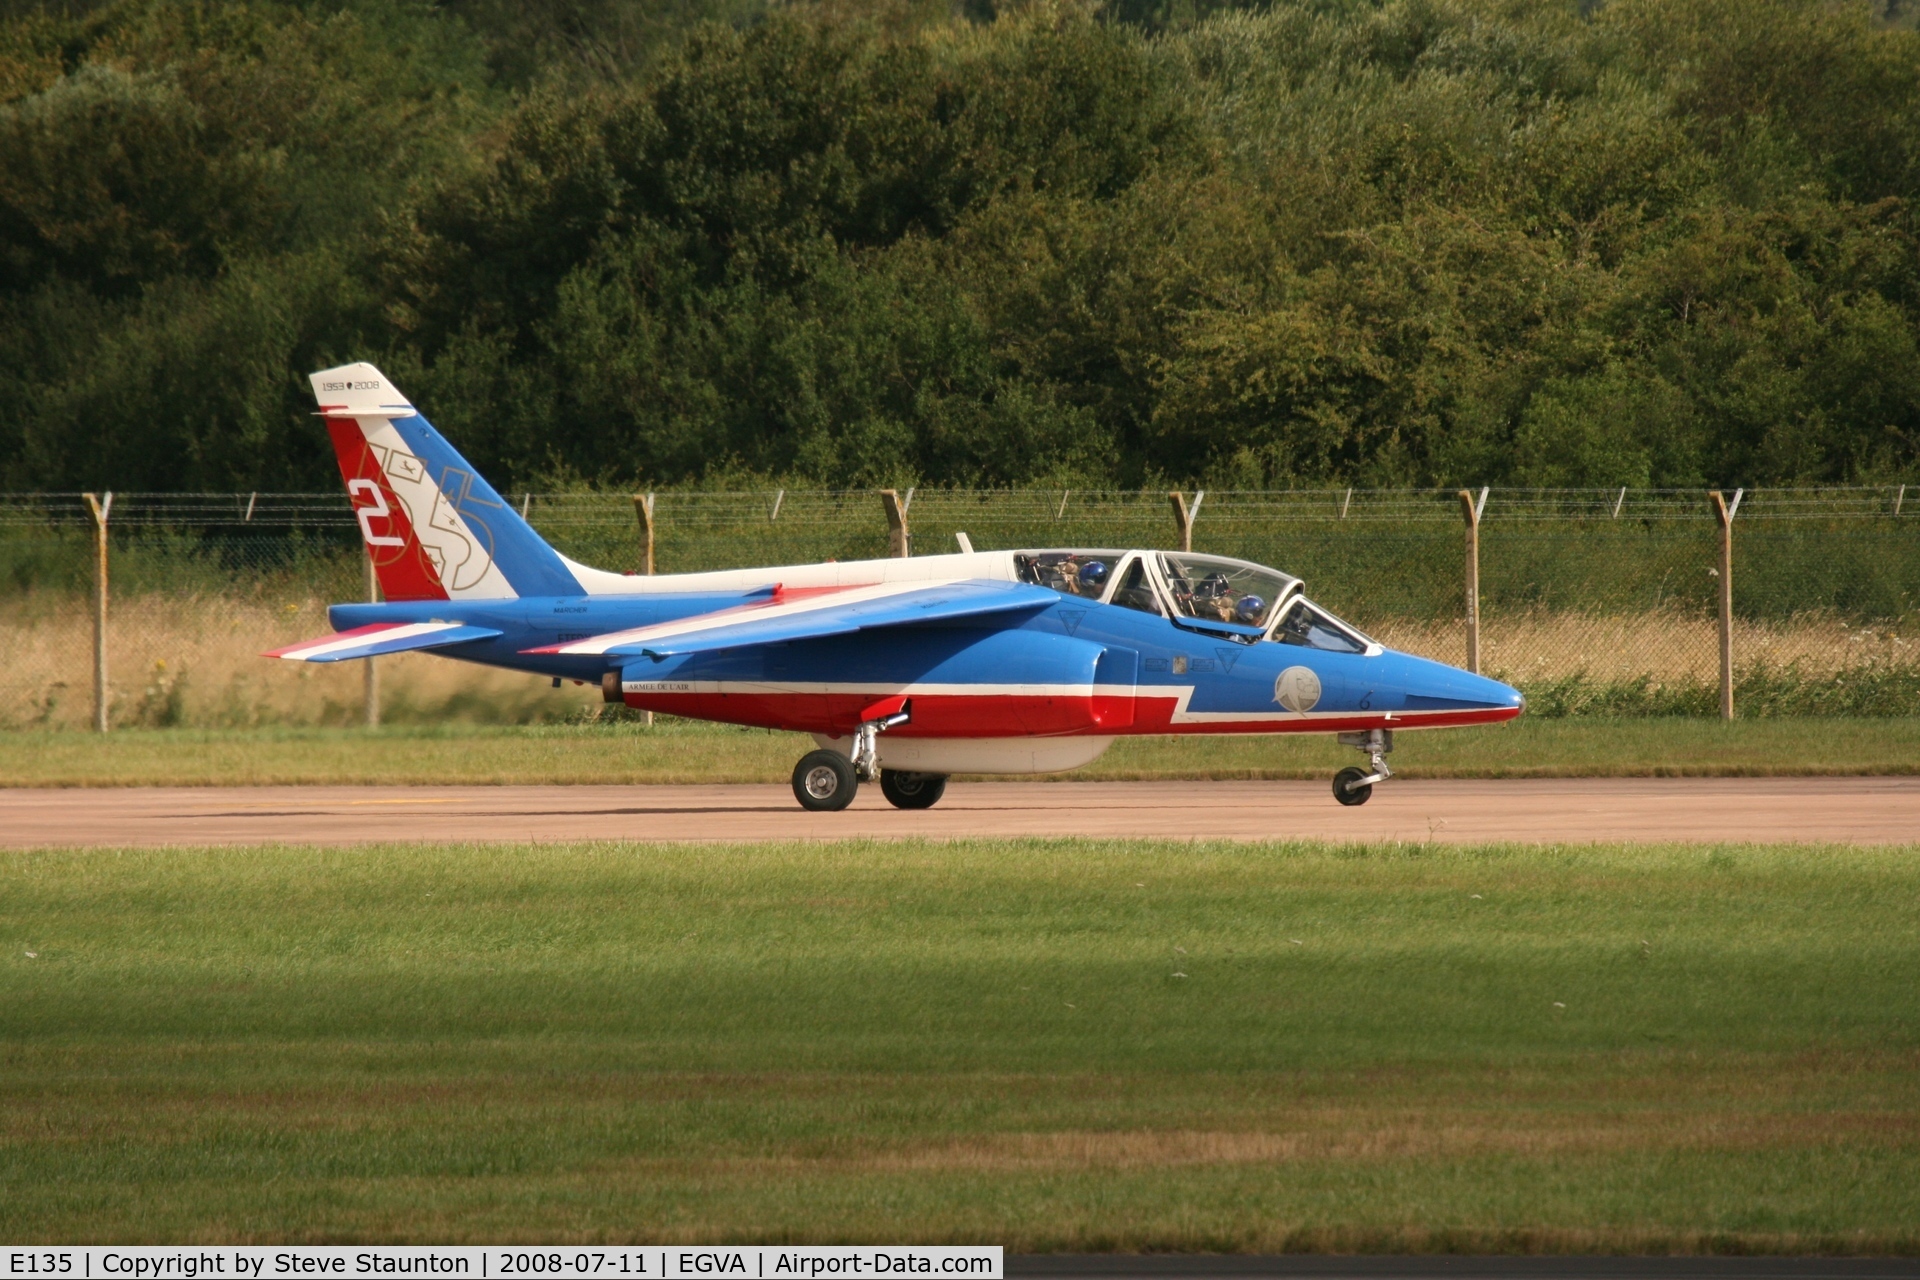 Taken at the Royal International Air Tattoo 2008 during arrivals and 